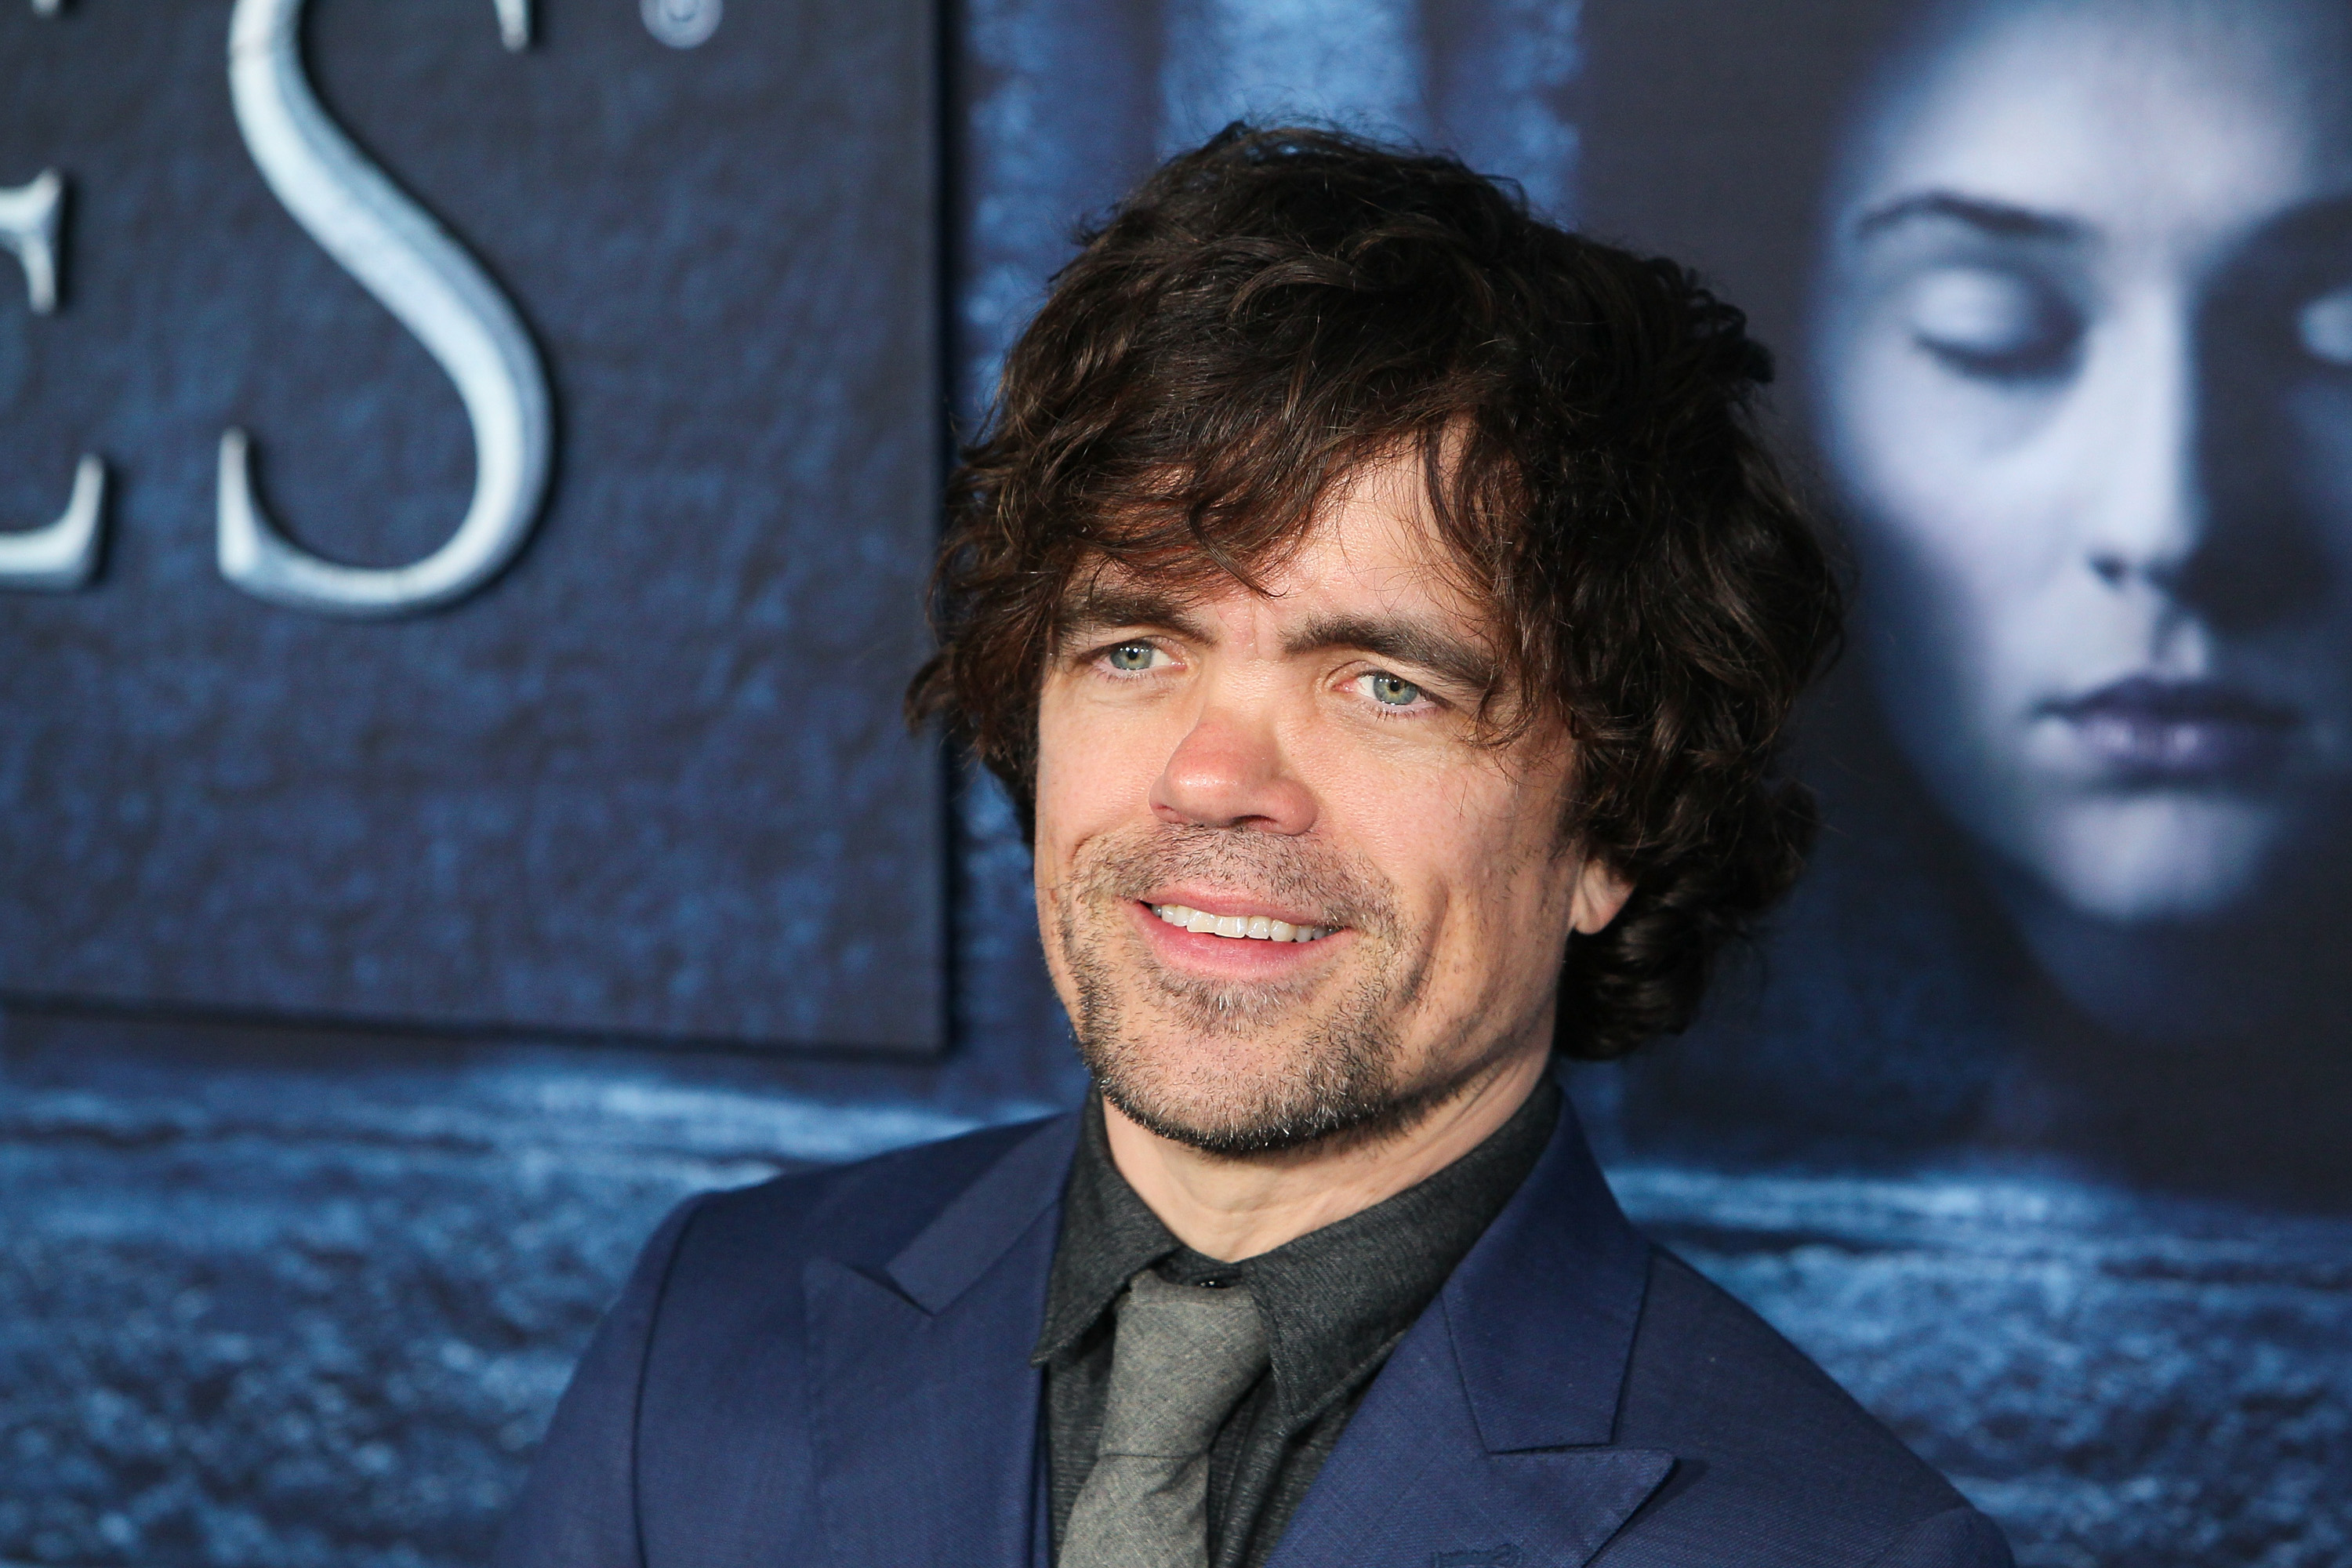 Actor Peter Dinklage arrives at the premiere of HBO's "Game of Thrones" Season 6 on April 10, 2016 in Hollywood, California. (David Livingston—Getty Images)